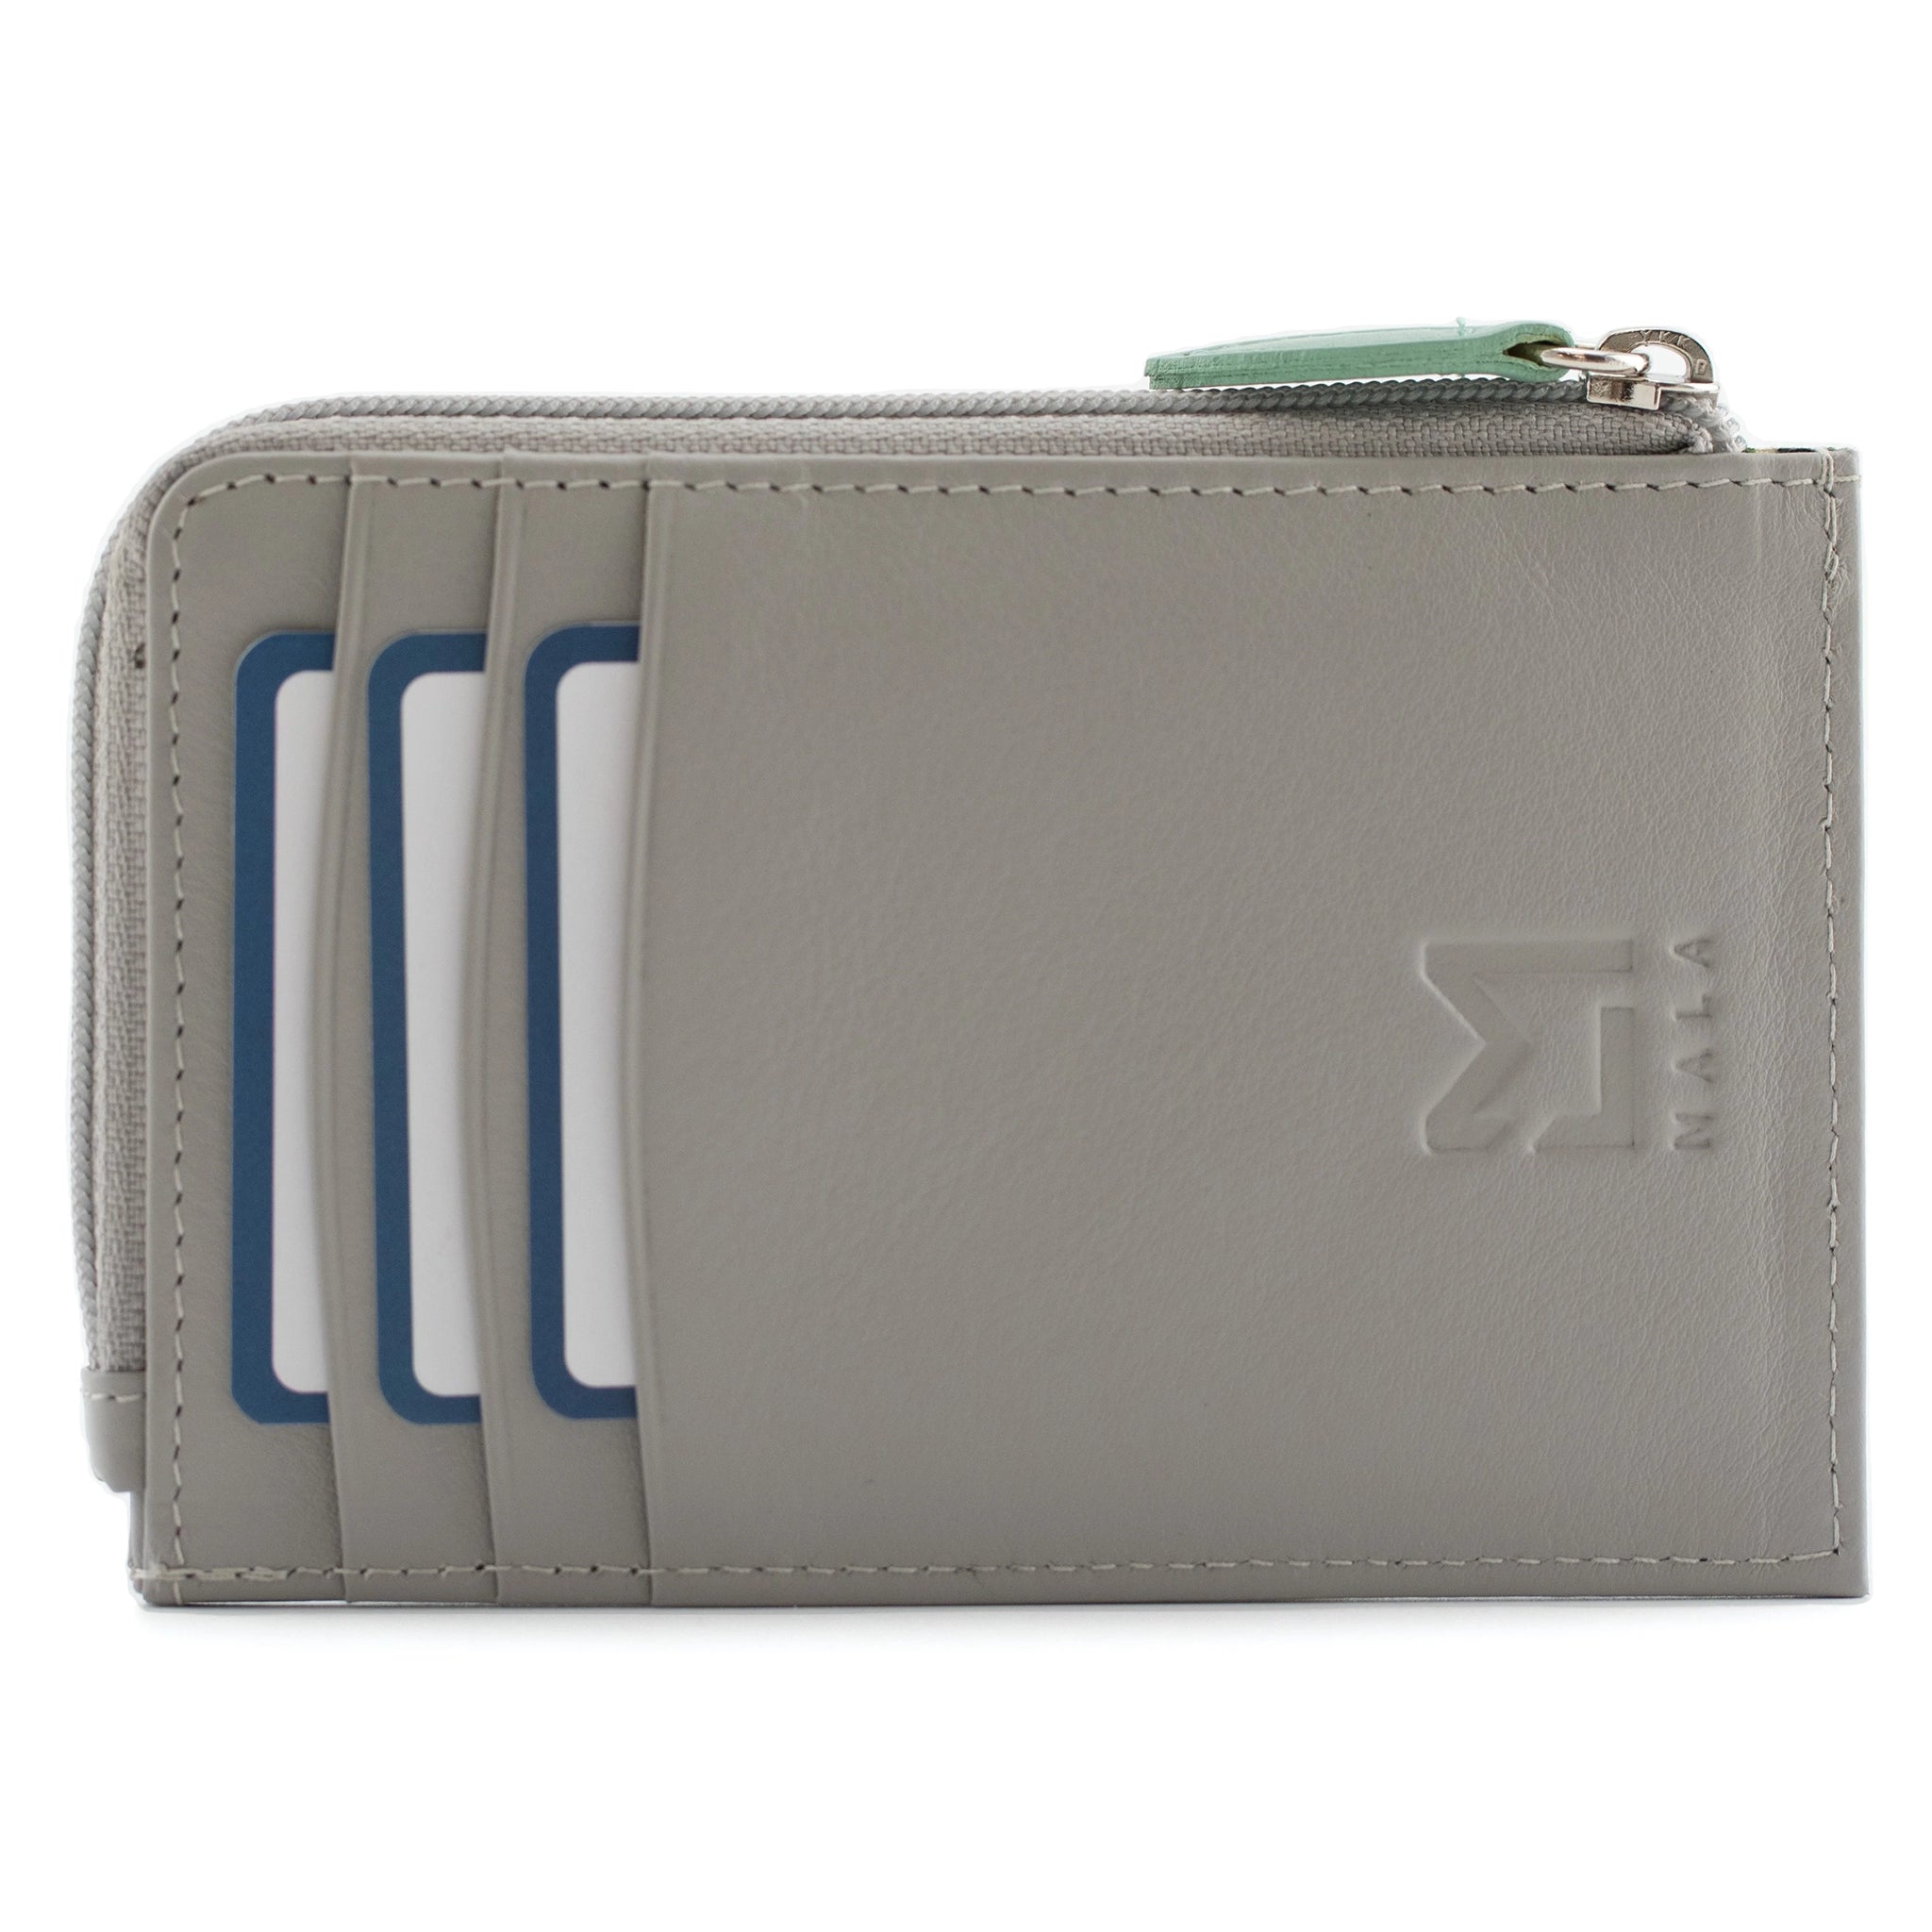 Back of a grey zip purse with three card slots